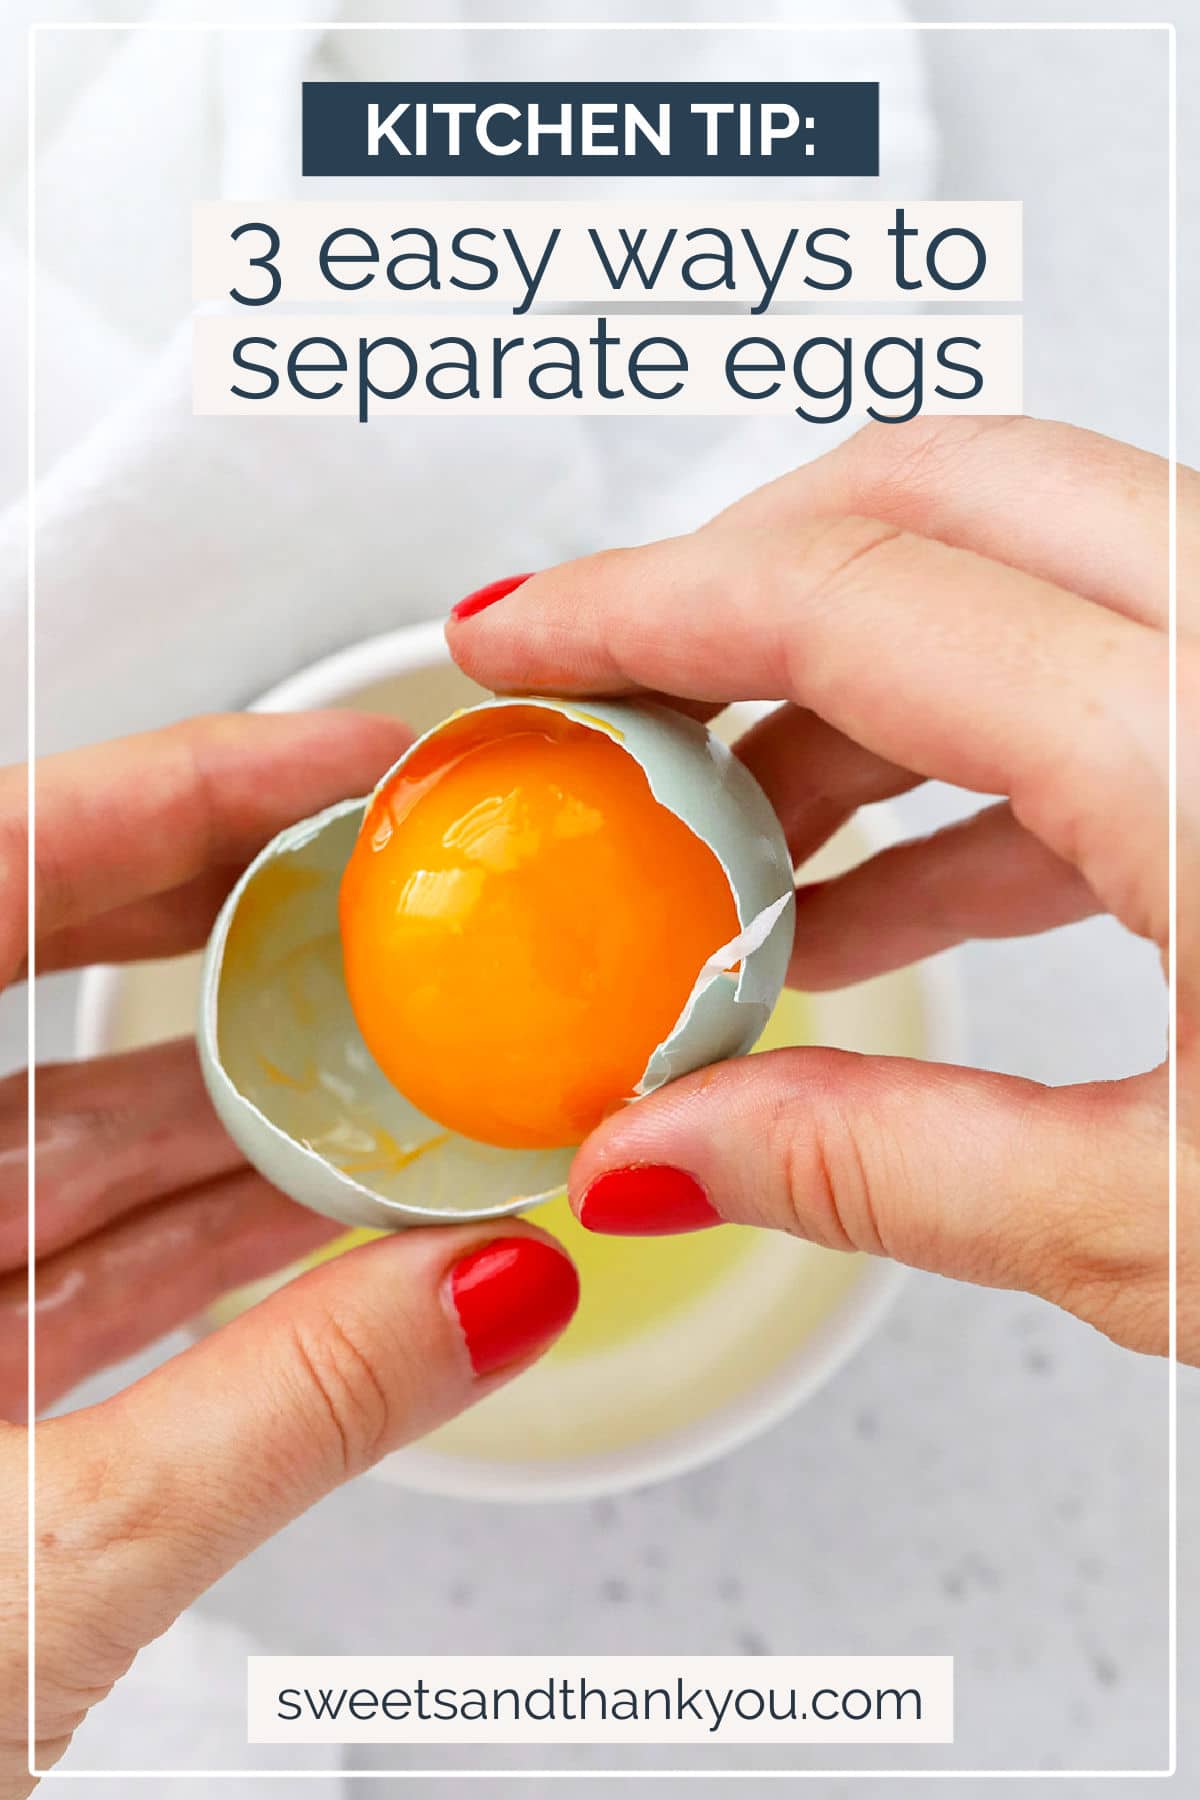 How to Separate Eggs - Learn 3 ways to separate egg whites and yolks for recipes. You’ll be ready to whip up meringues, add texture to cookies, and more! // How to separate eggs // How to separate egg yolks and whites // Baking Tips // Baking Basics // Baking Tutorial // Separating eggs #baking #glutenfreebaking #bakingtip #kitchentip #bakingtutorial #eggs #eggyolks #eggwhites